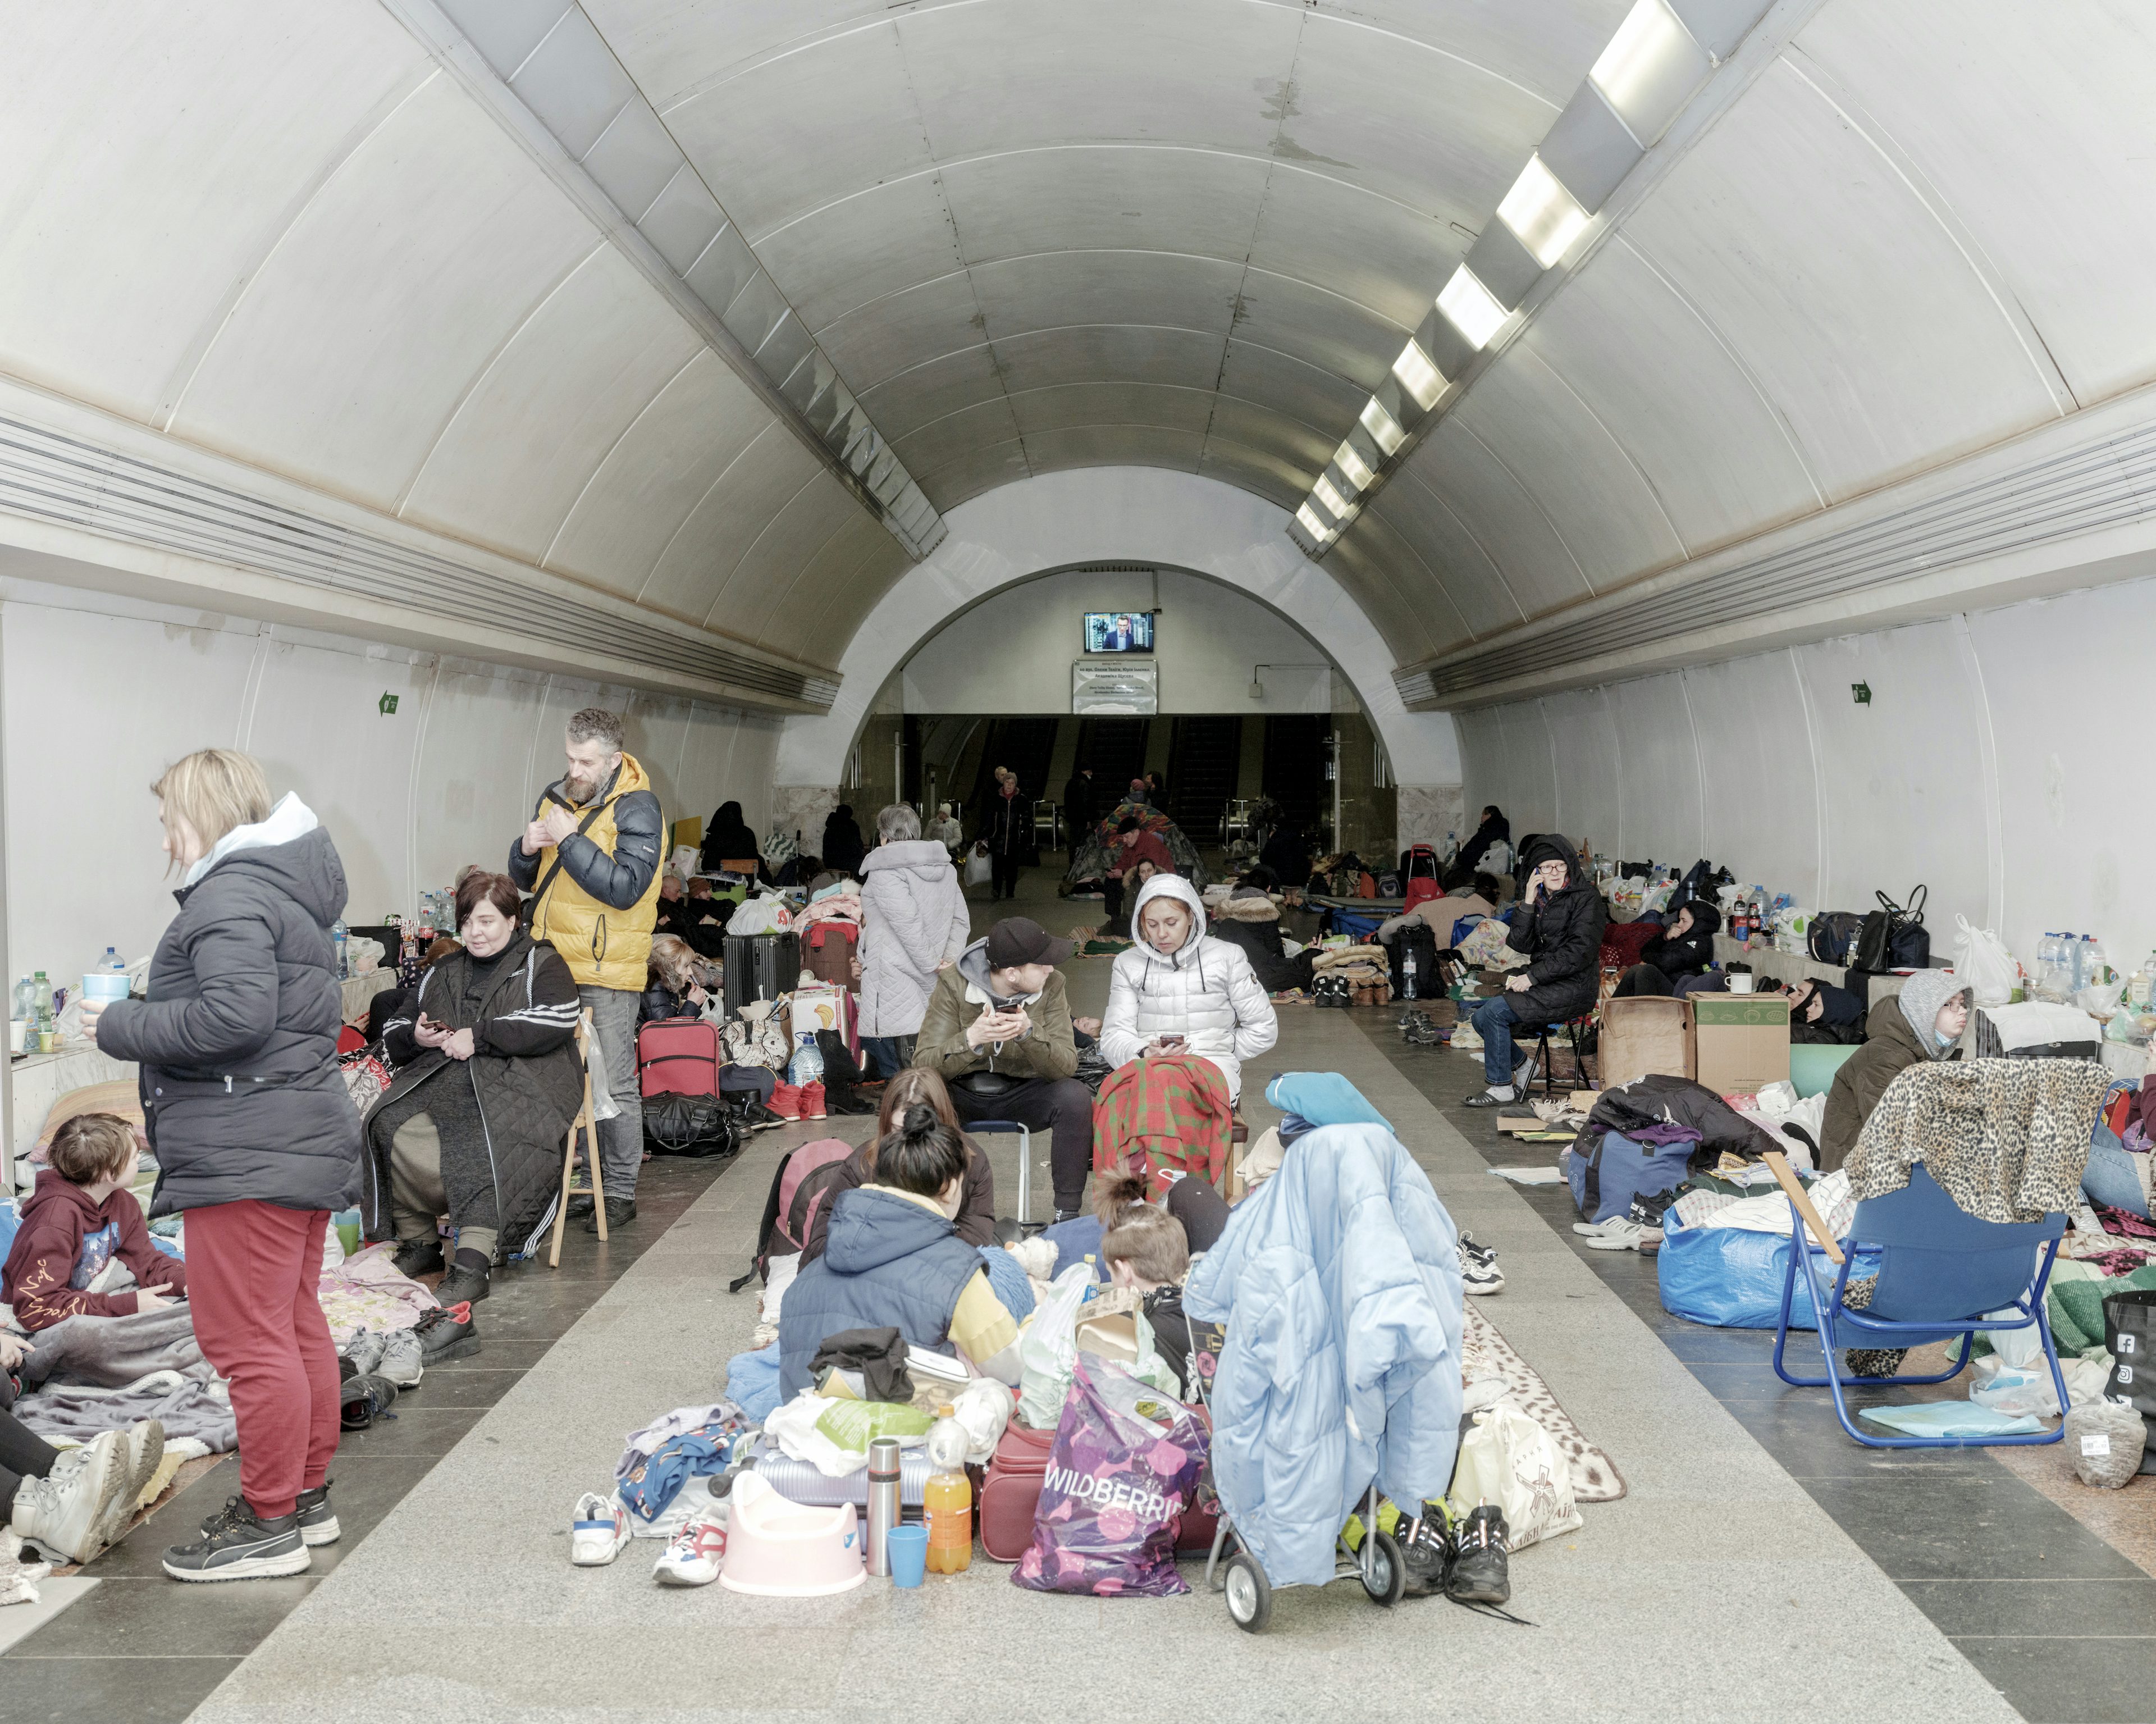 UKRAINE. Kyiv. 4 March 2022. Entire families find shelter from Russian artillery fire inside the tunnel of a metro station. Photo by Lorenzo Meloni